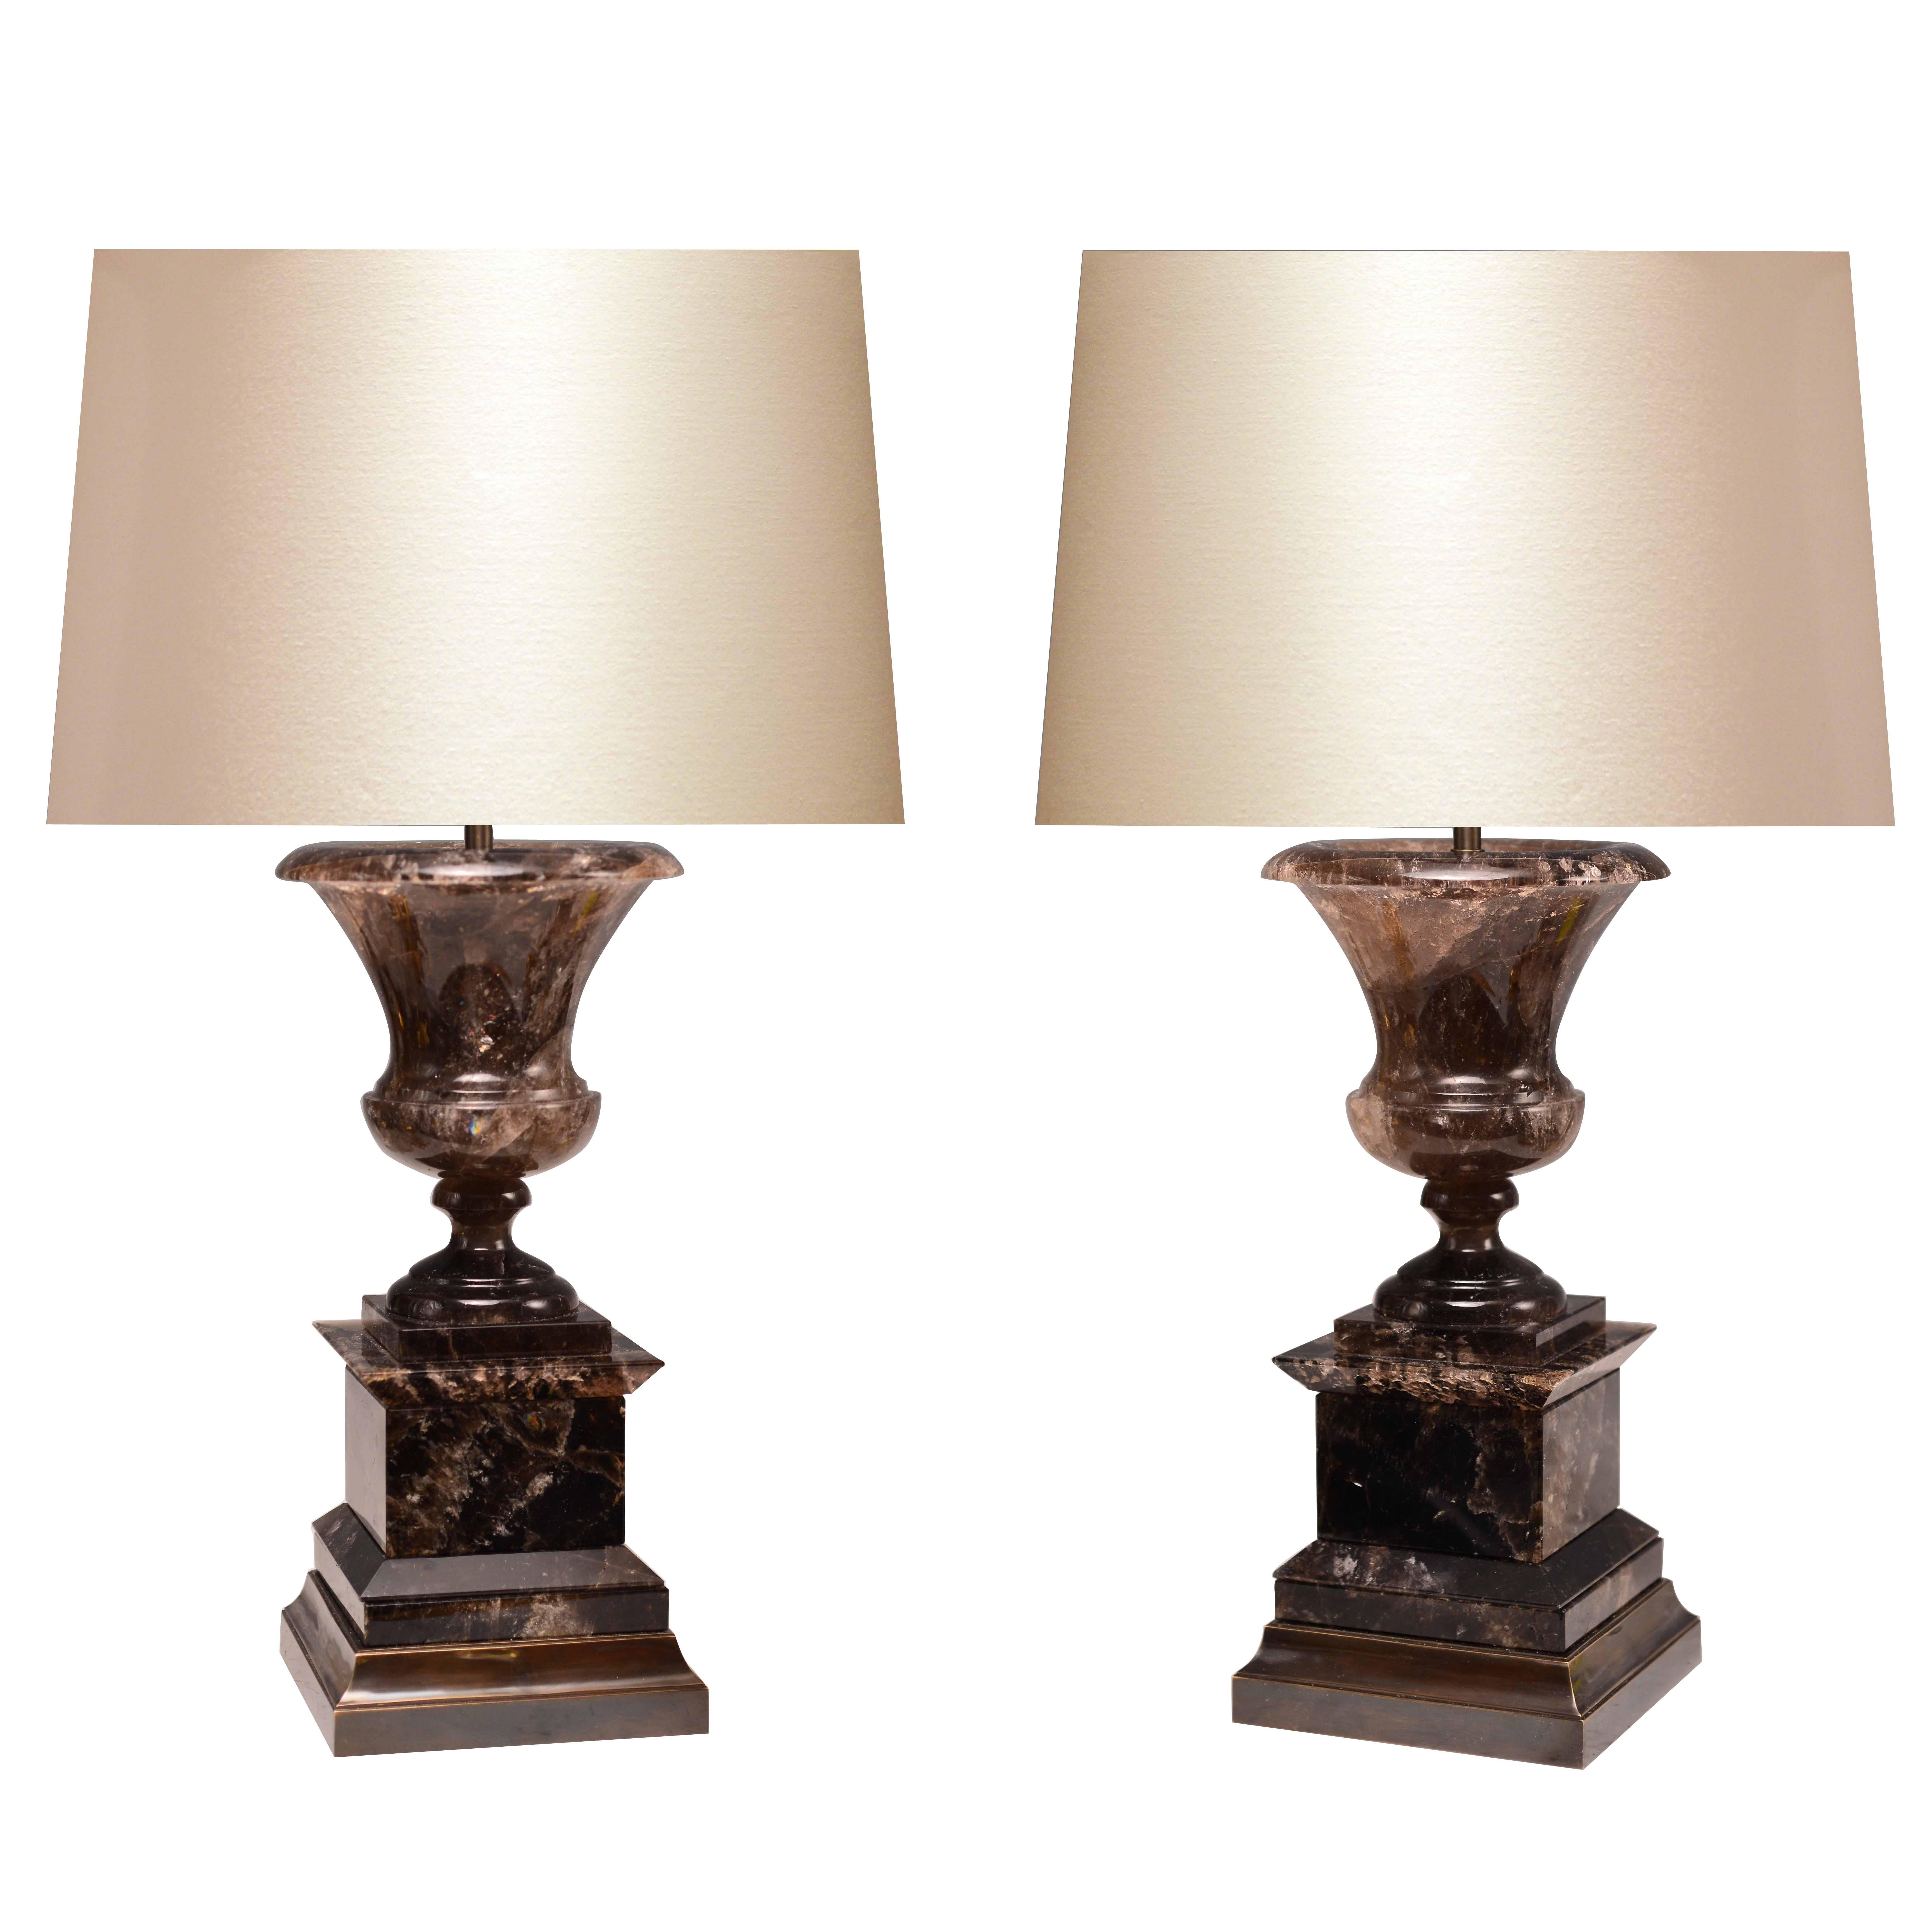 Pair of Smoky Brown Rock Crystal Quartz Urn Table Lamps For Sale